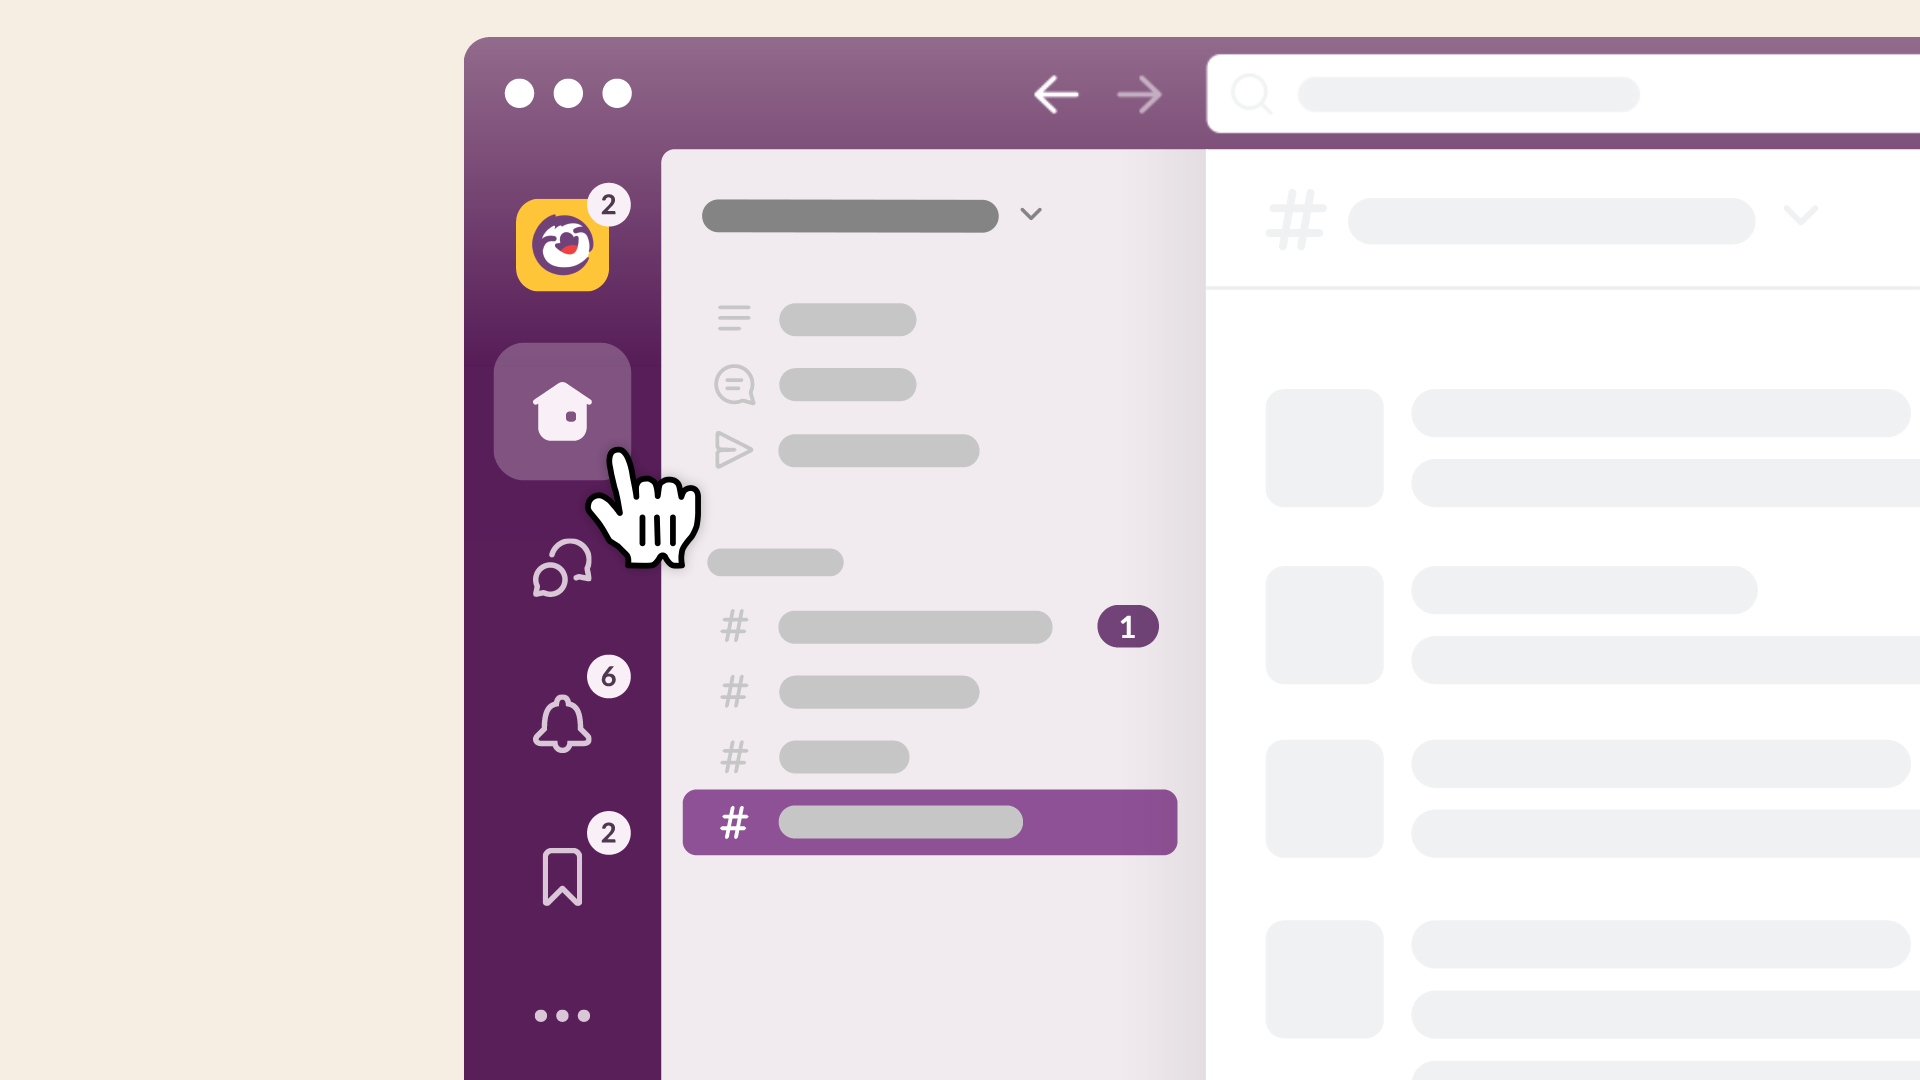 View of the sidebar in Slack